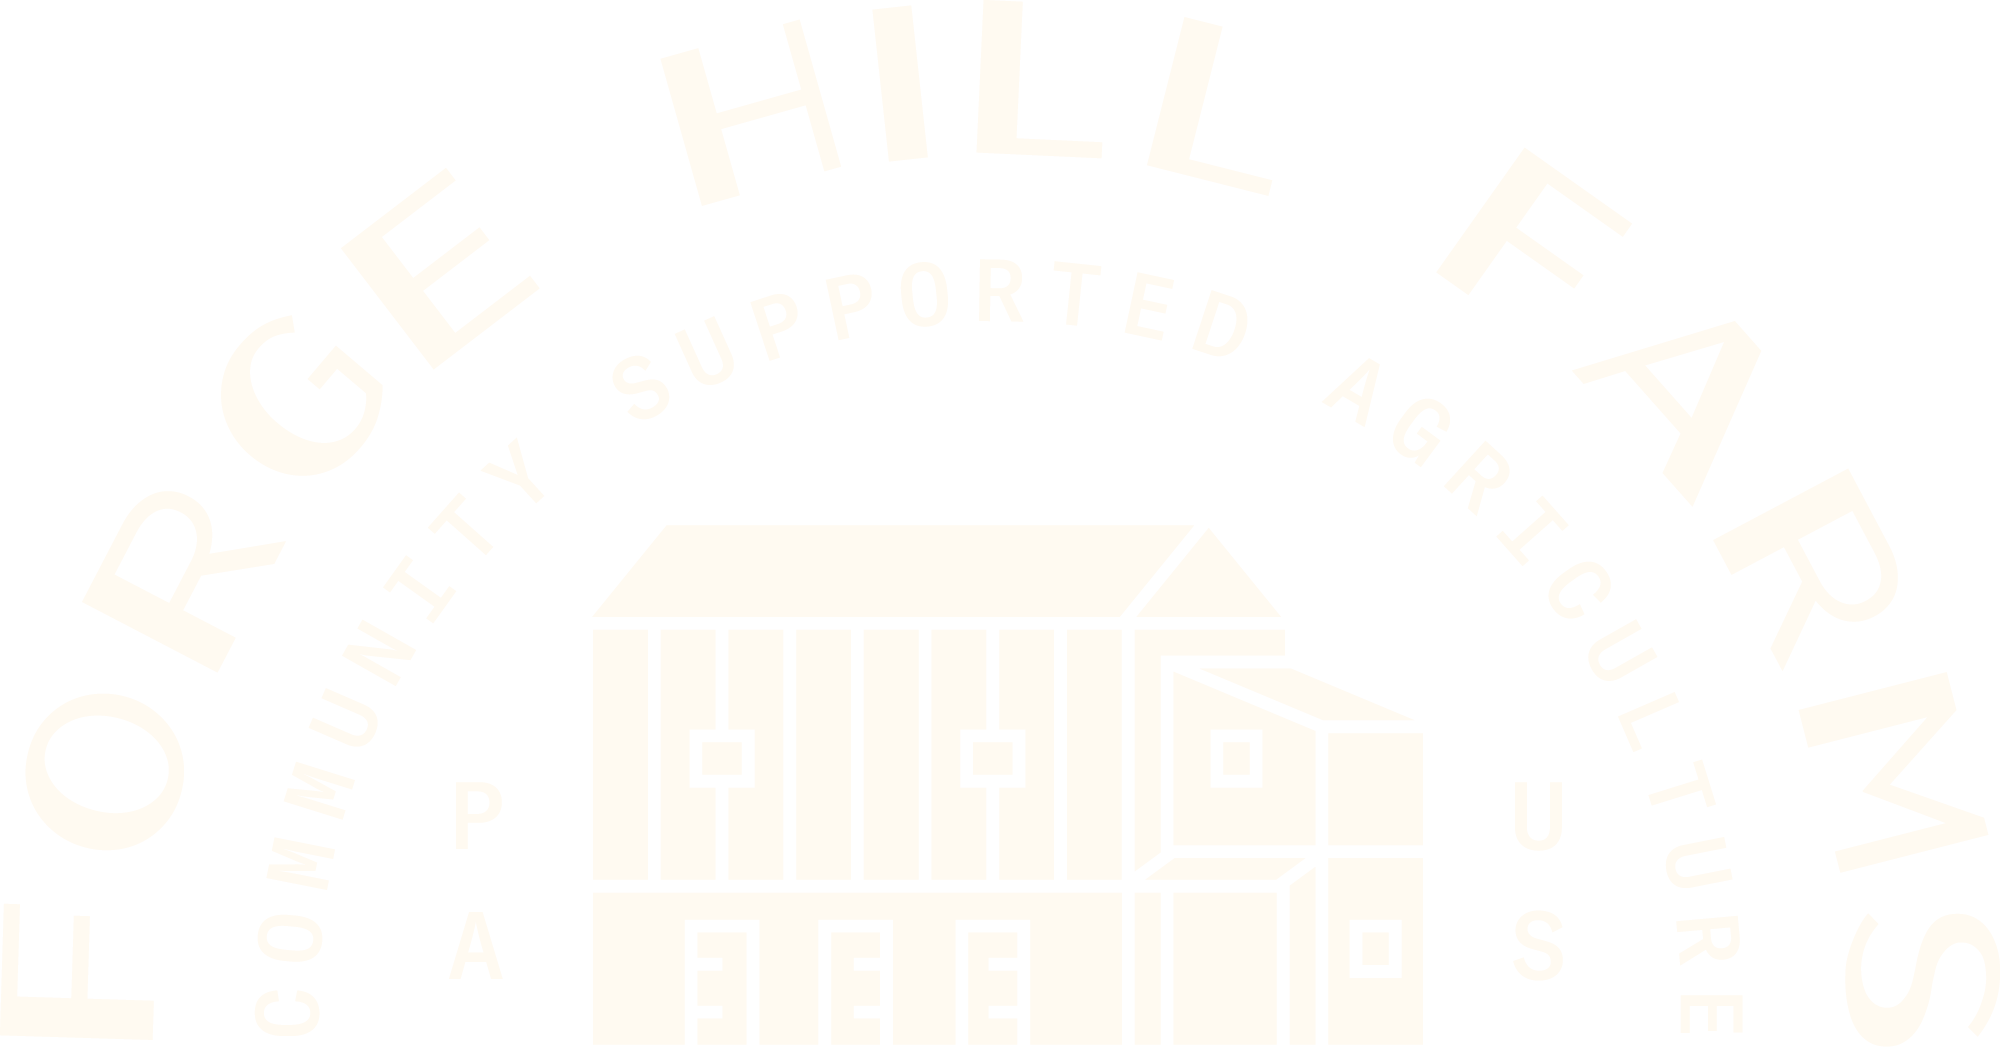 Forge Hill Farms